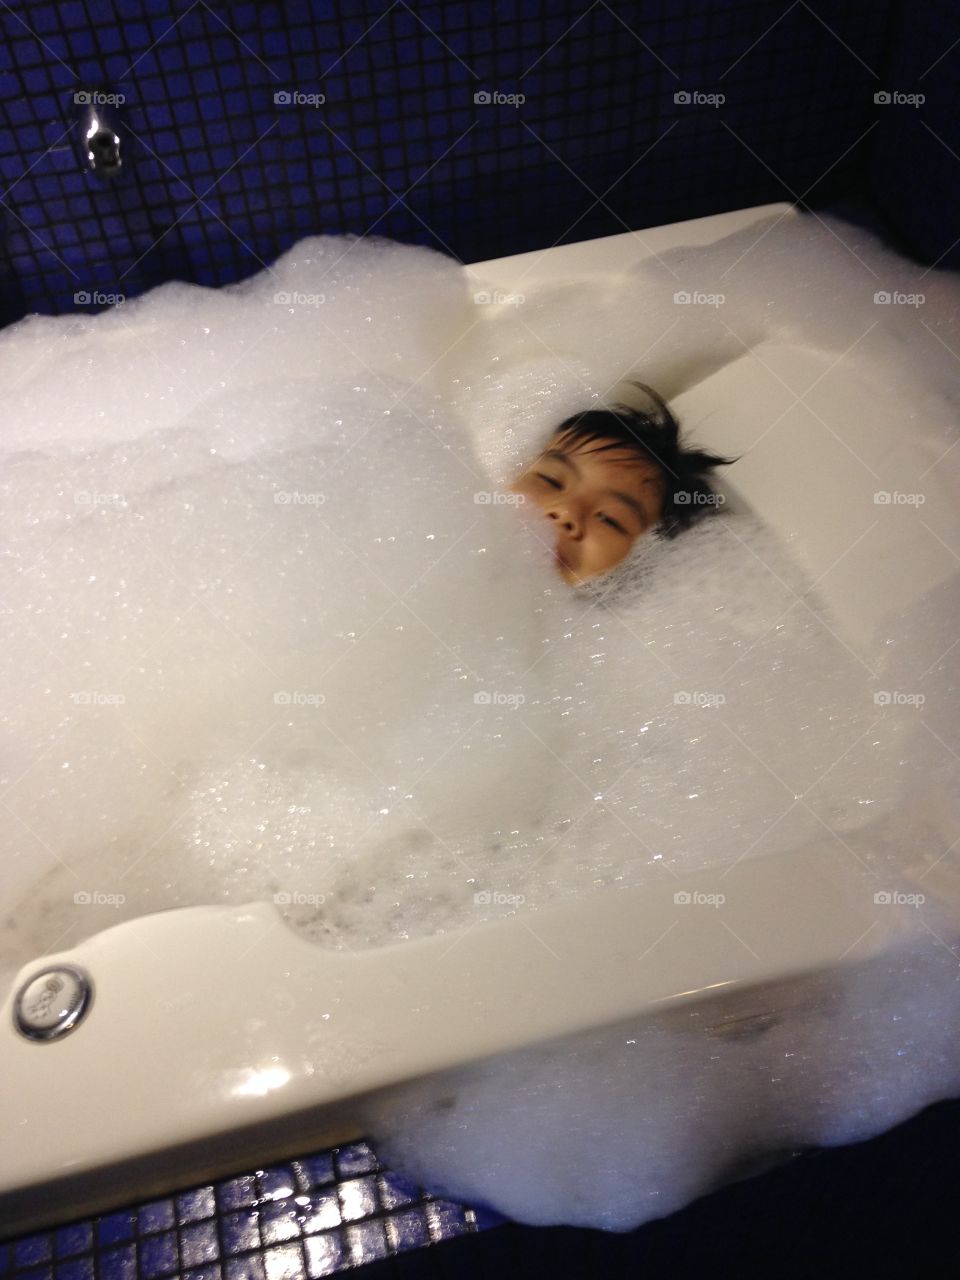 my grandson playing in the bathtub covering himself with soap suds